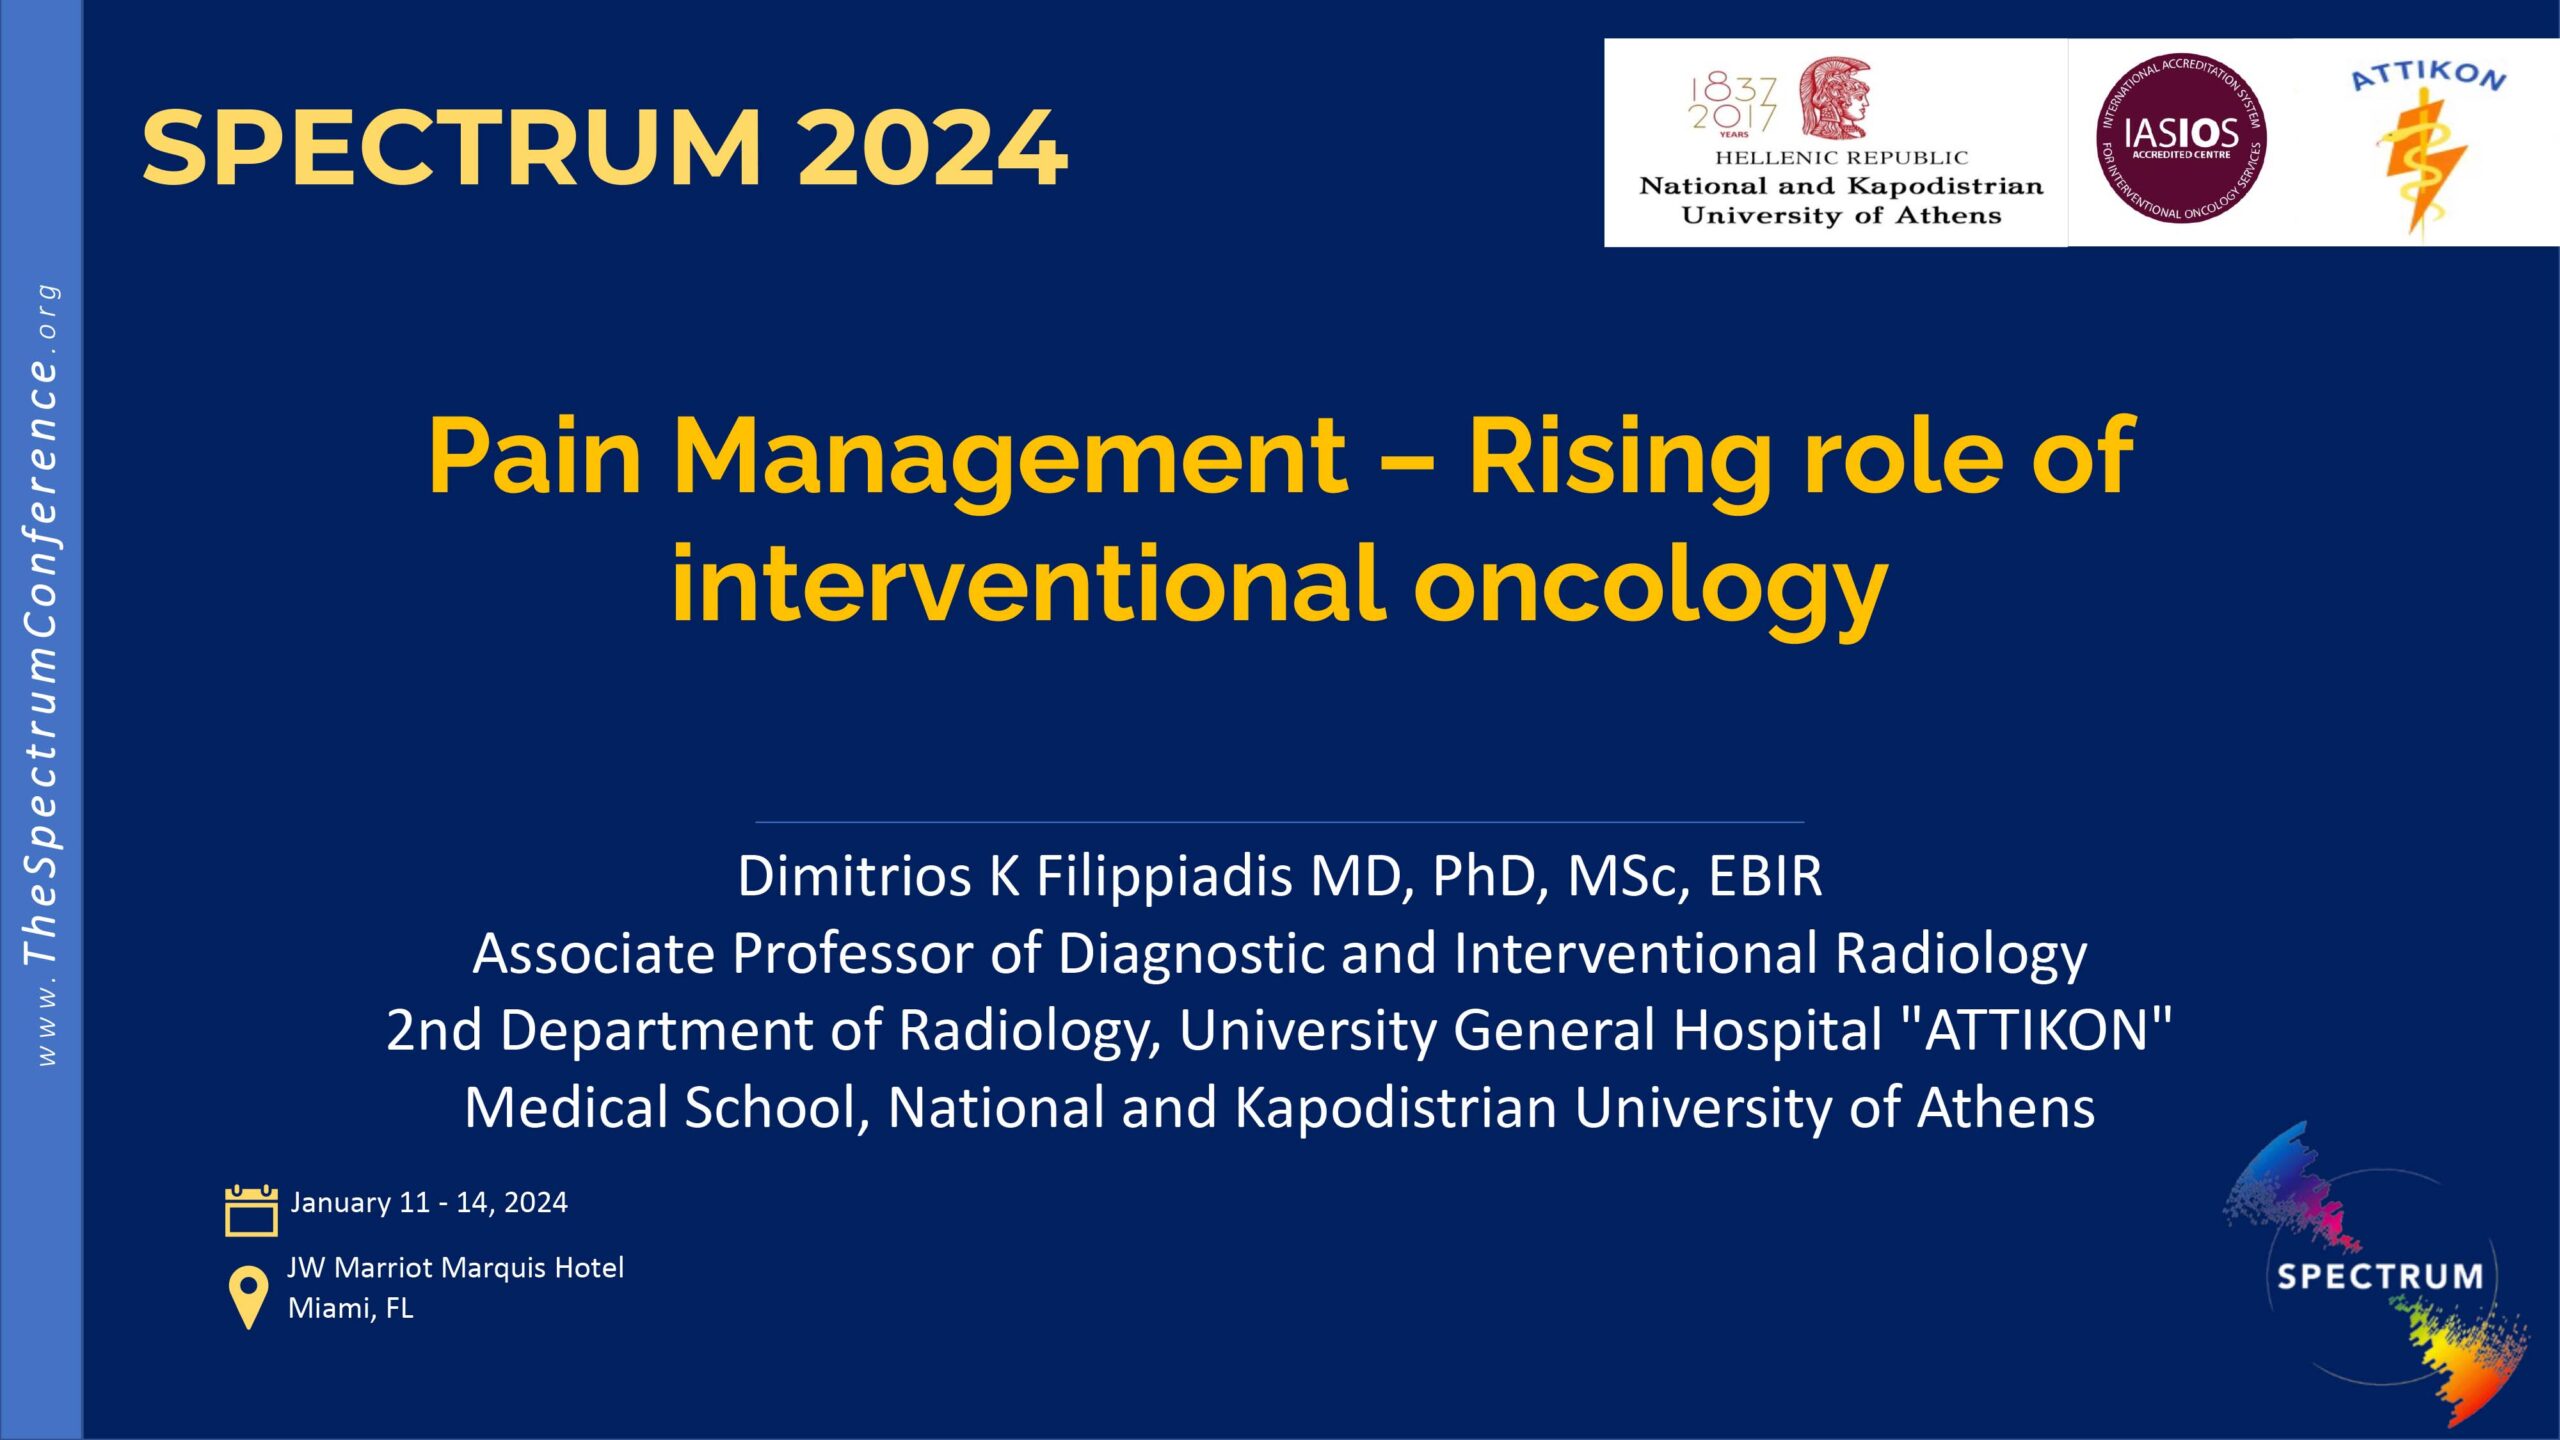 Pain Management – Rising role of interventional oncology